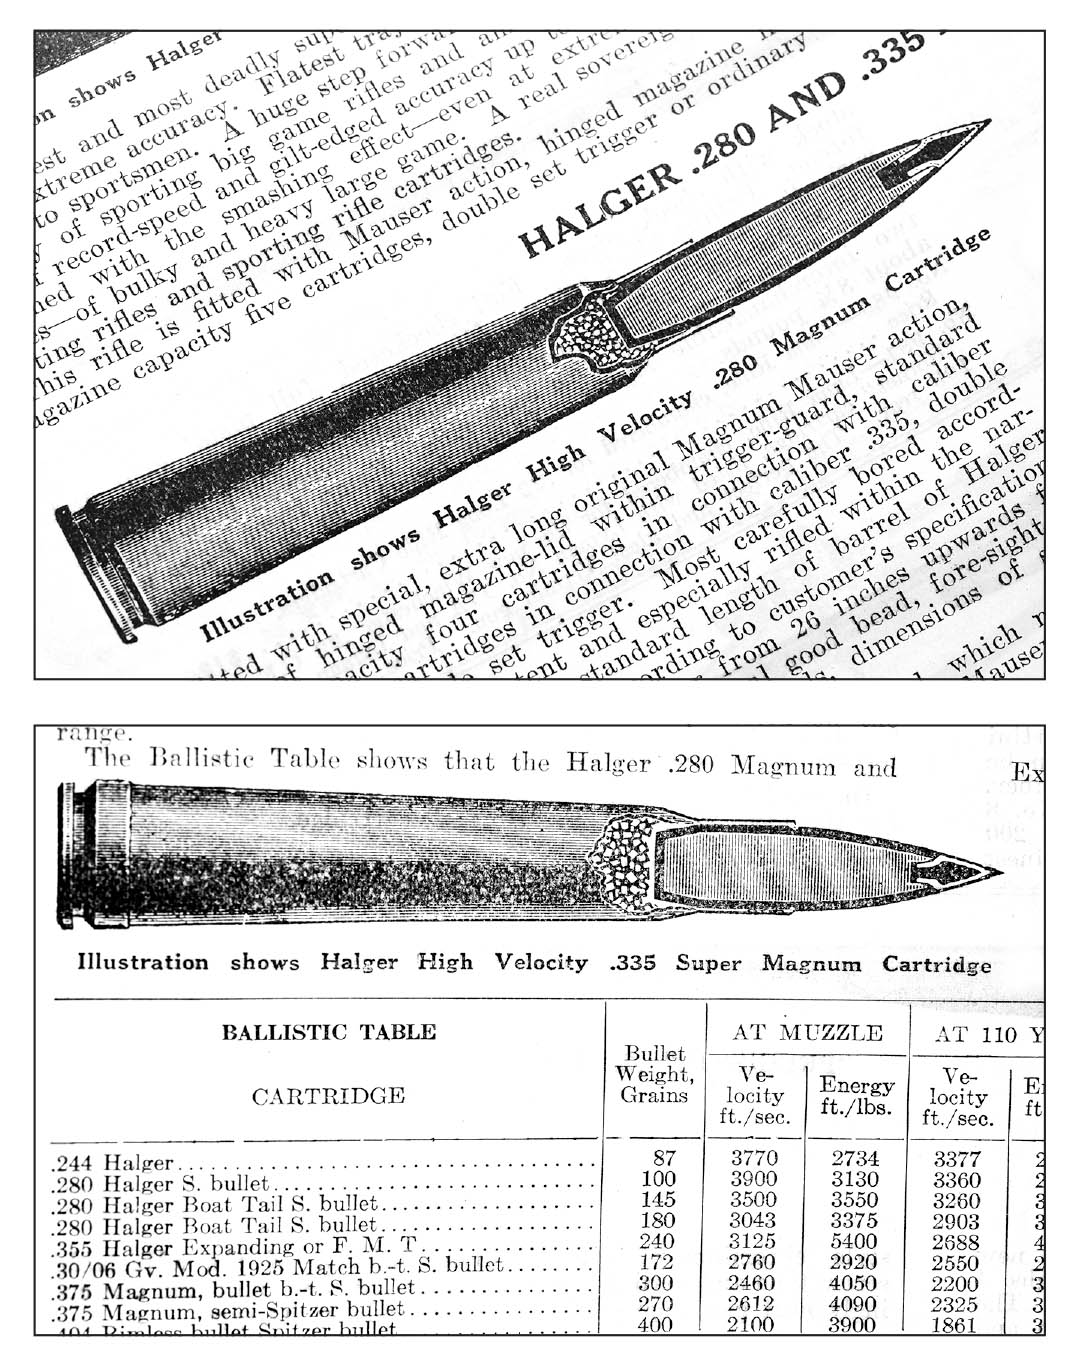 These illustrations for Halger cartridges are from the 1934 A.F. Stoeger catalog. Harold Gerlich died shortly thereafter, and his rifles and cartridges died with him.